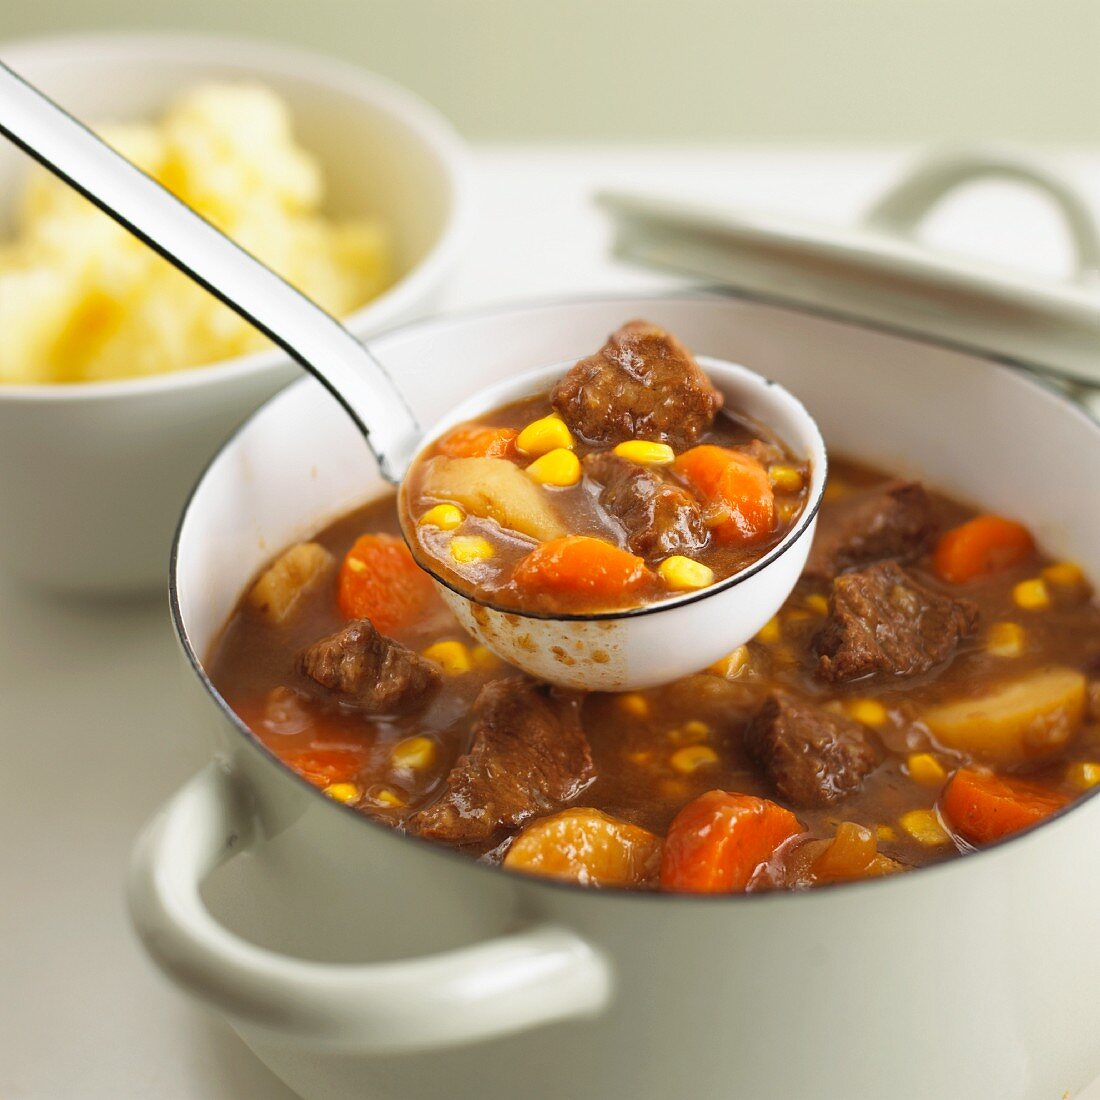 Beef stew with potatoes, sweetcorn and carrots